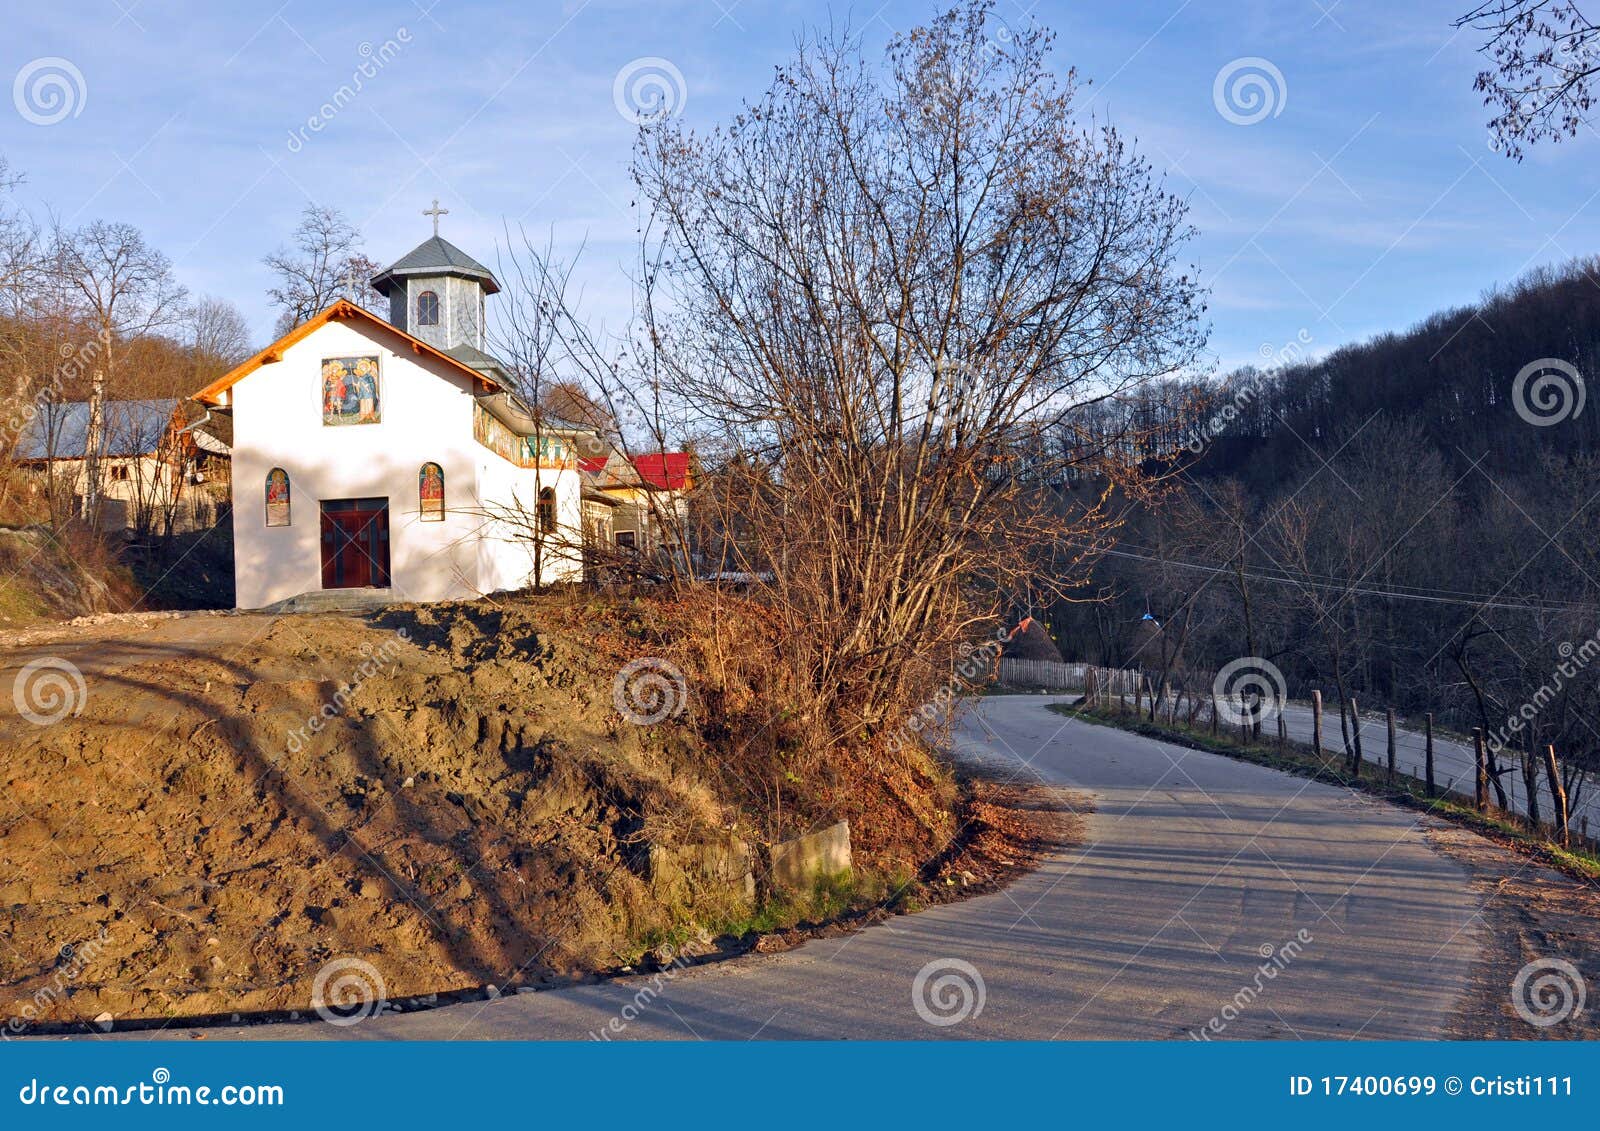 Church in 180 degree curve stock image. Image of parallel - 17400699